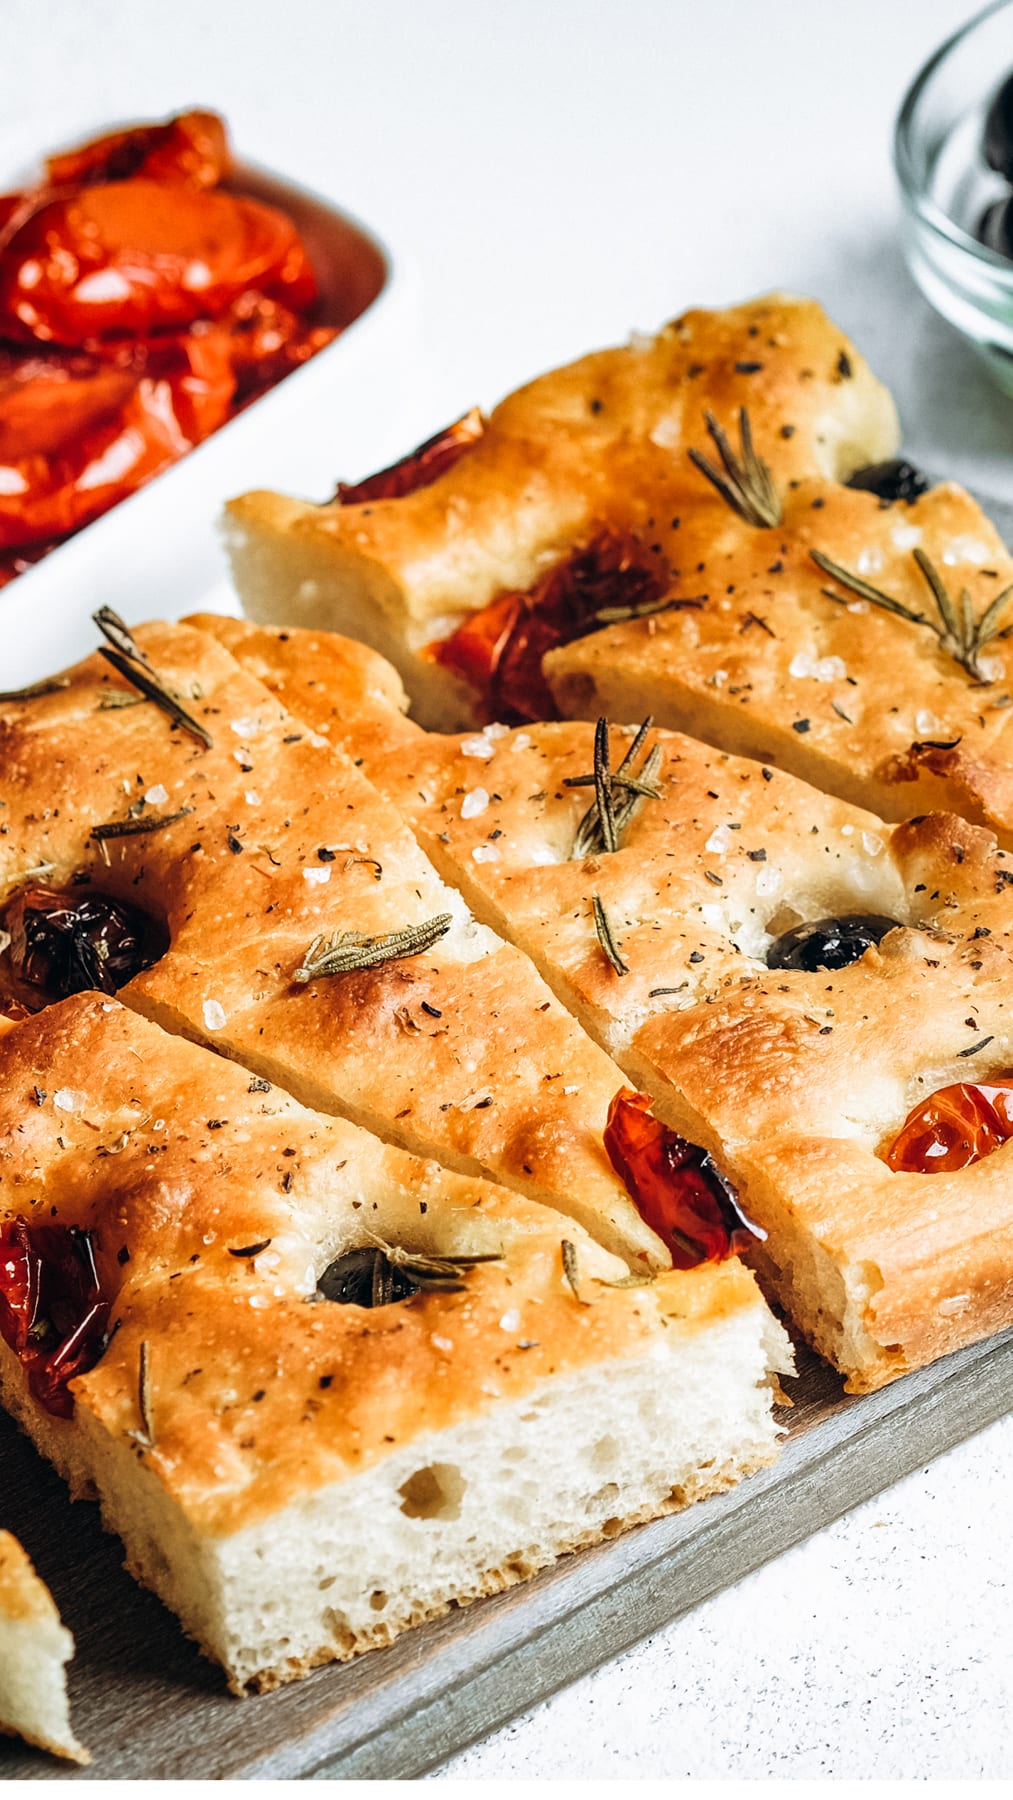 Traditional Italian Focaccia with tomatoes, olives